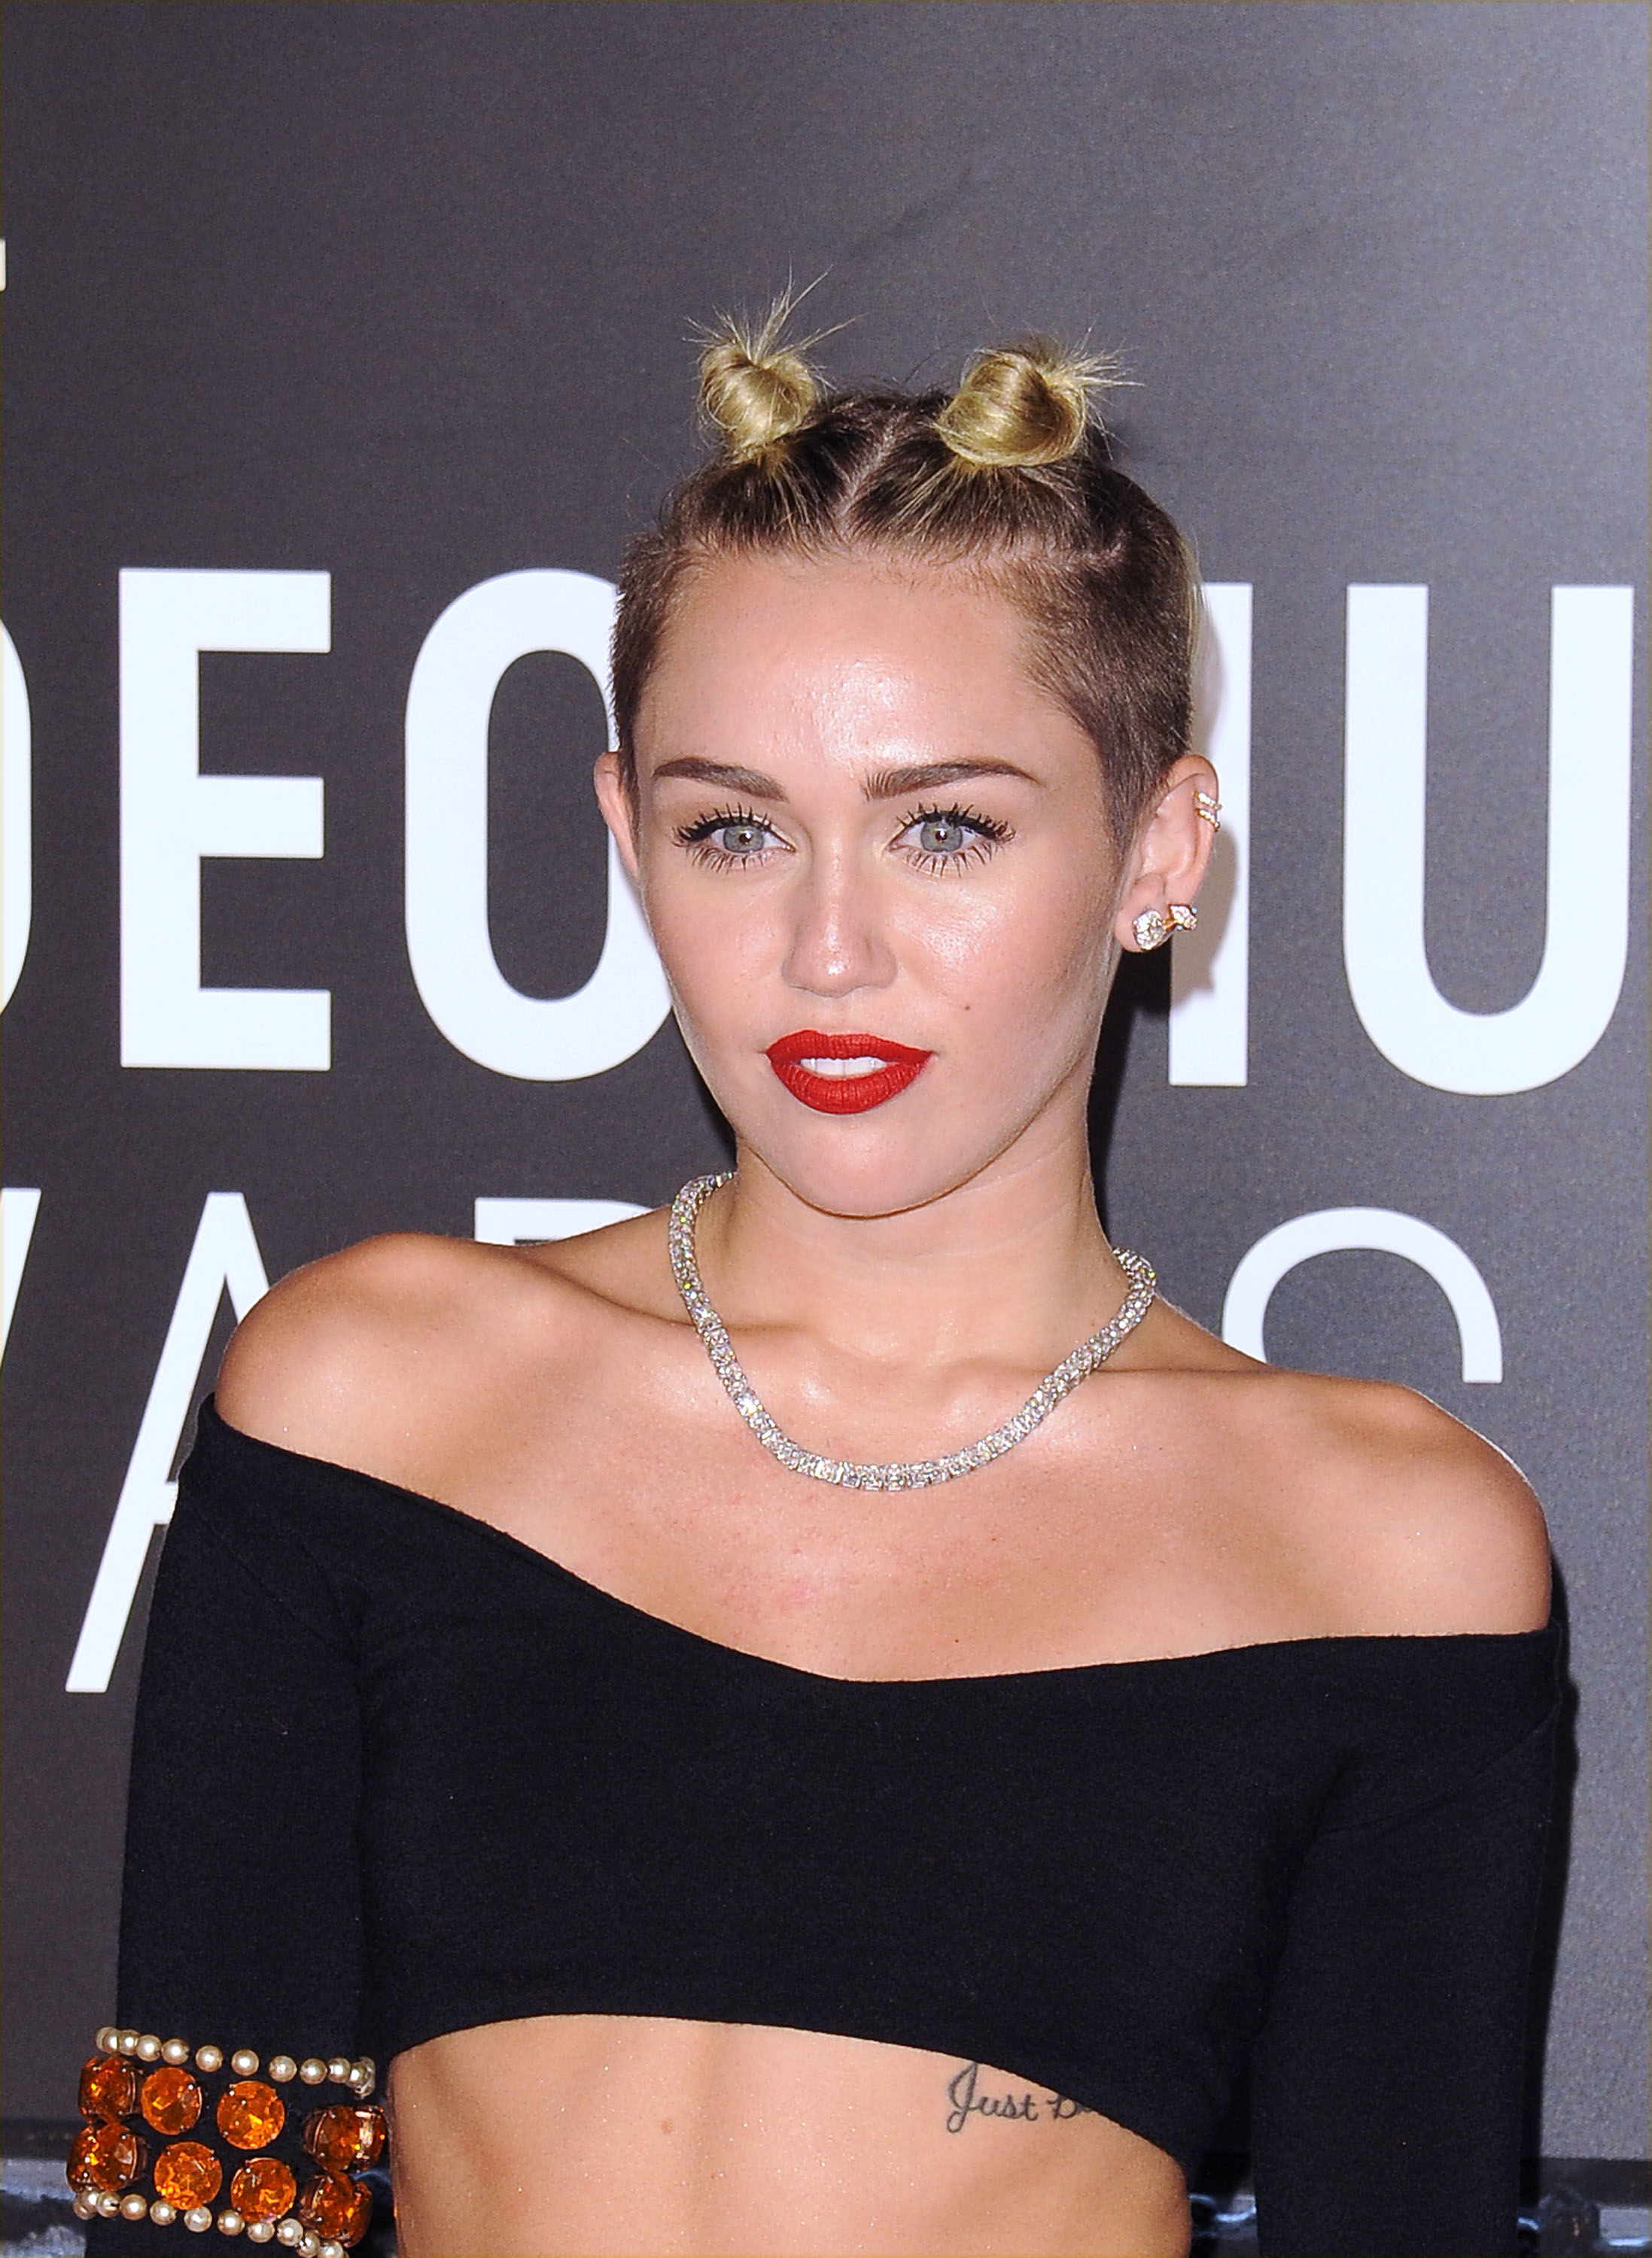 Close-up of Miley in an off-the-shoulder crop top